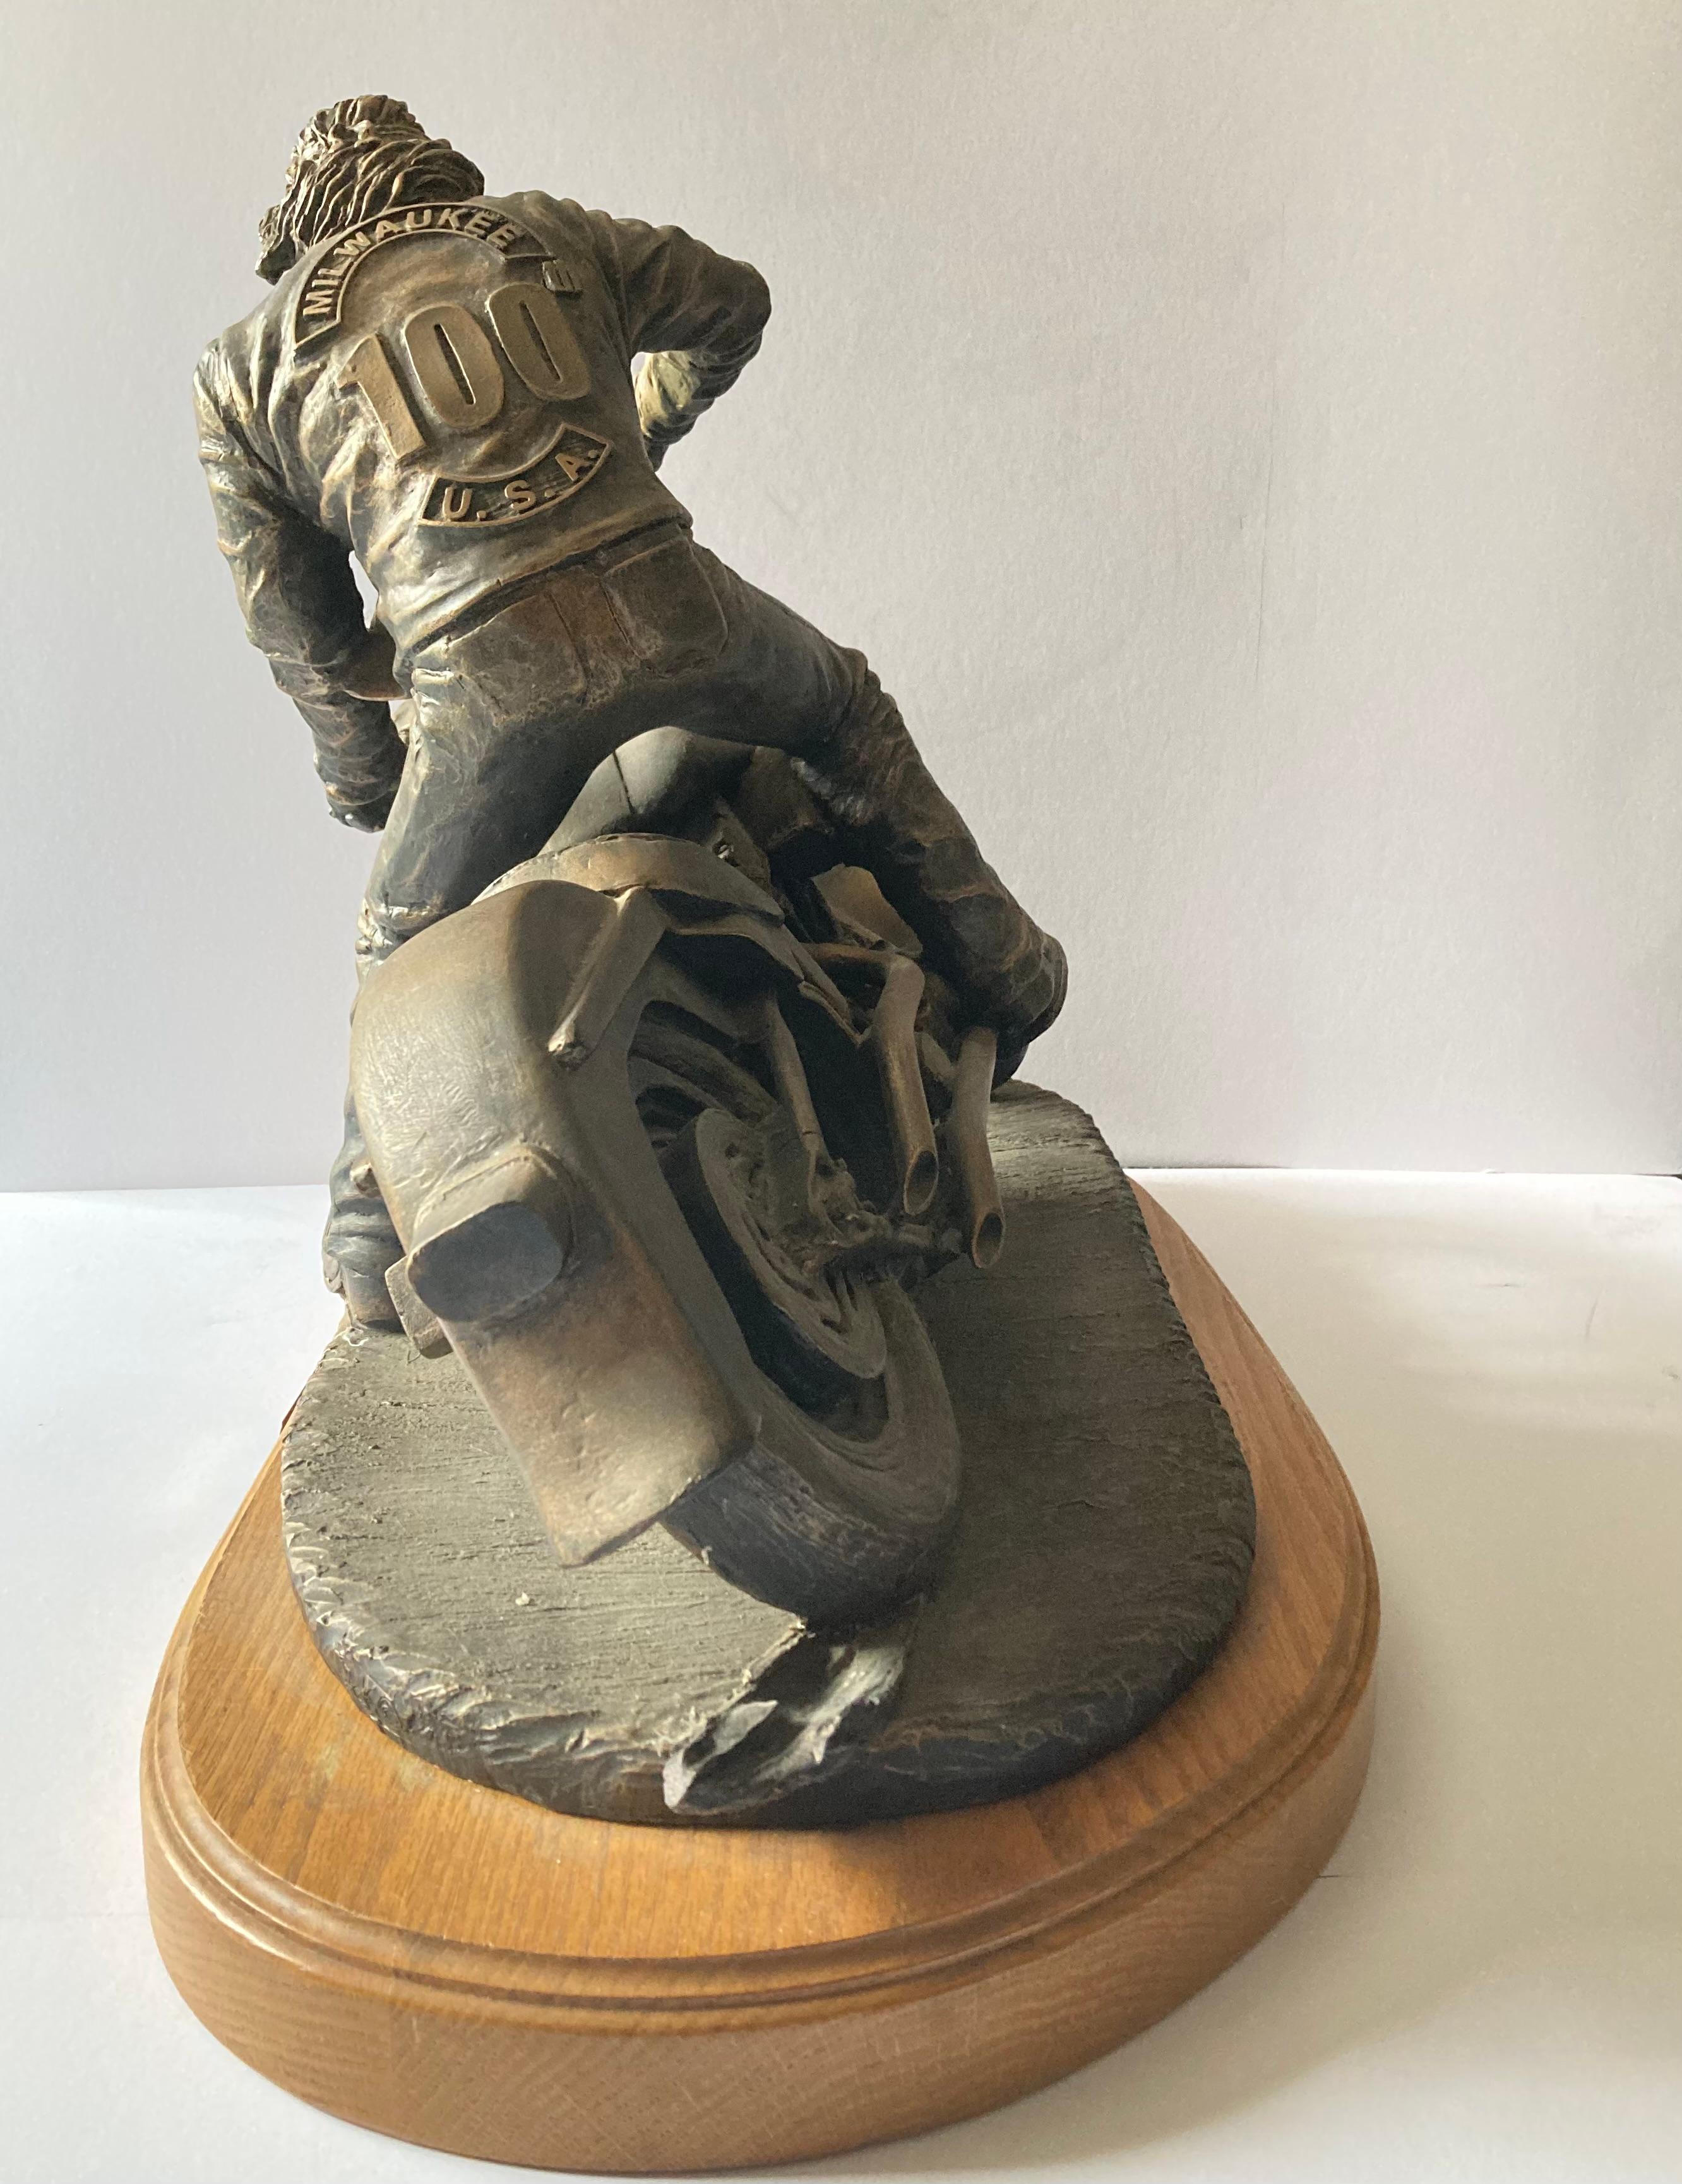 This is an Mark Patrick sculpture “full throttle” Milwaukee 100th anniversary. Signed and numbered In excellent shape. Sculpture measures 28x19x13